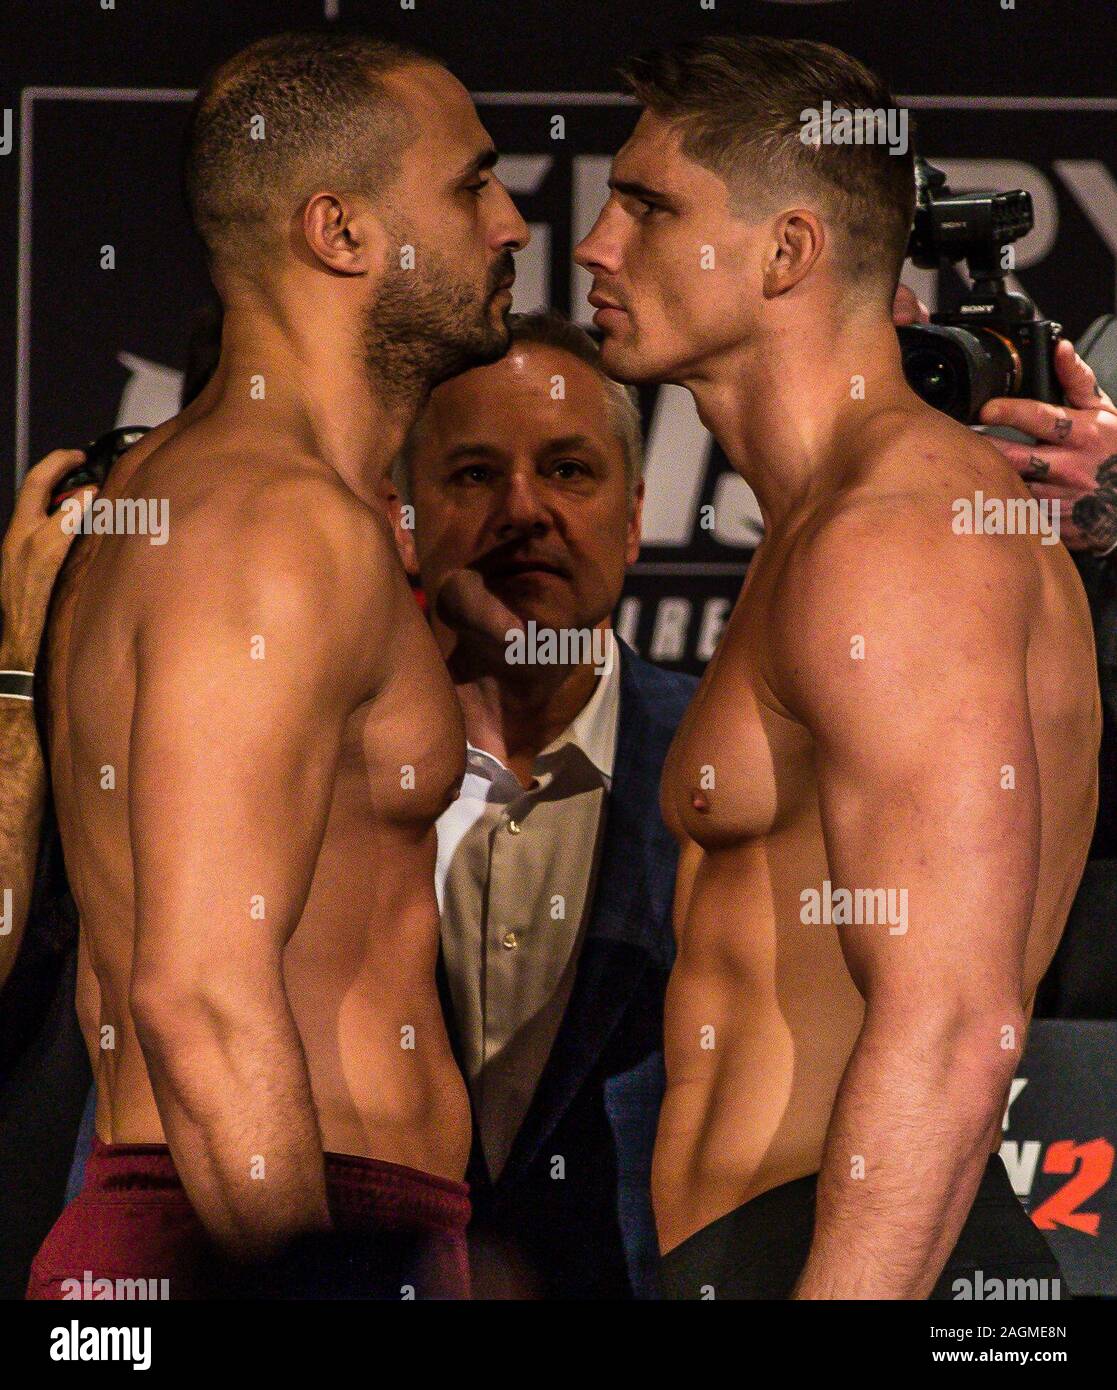 ARNHEM, 20-12-2019, Hotel Papendal, Weigh in and stare down, Glory Collision, Glory 74 en Colission 2 match Rico vs Badr, Rico Verhoeven, Badr Hari Credit Pro Shots/Alamy Live News Stock Photo